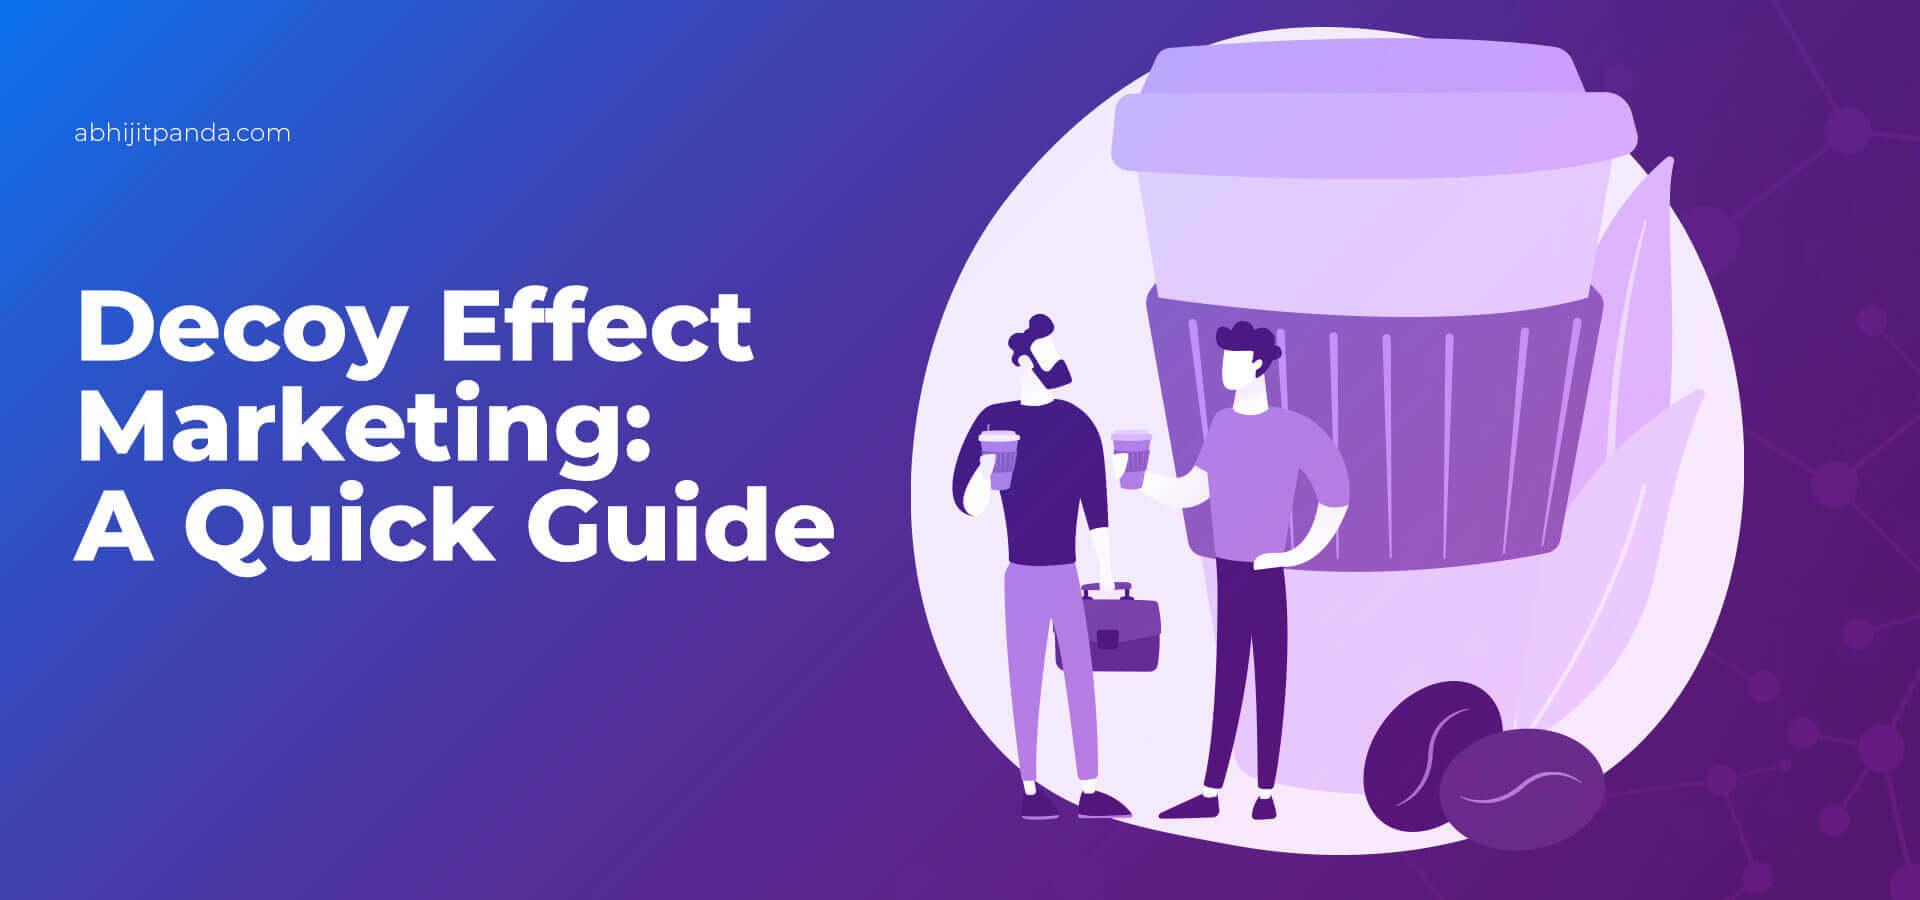 Decoy Effect Marketing: A Quick Guide